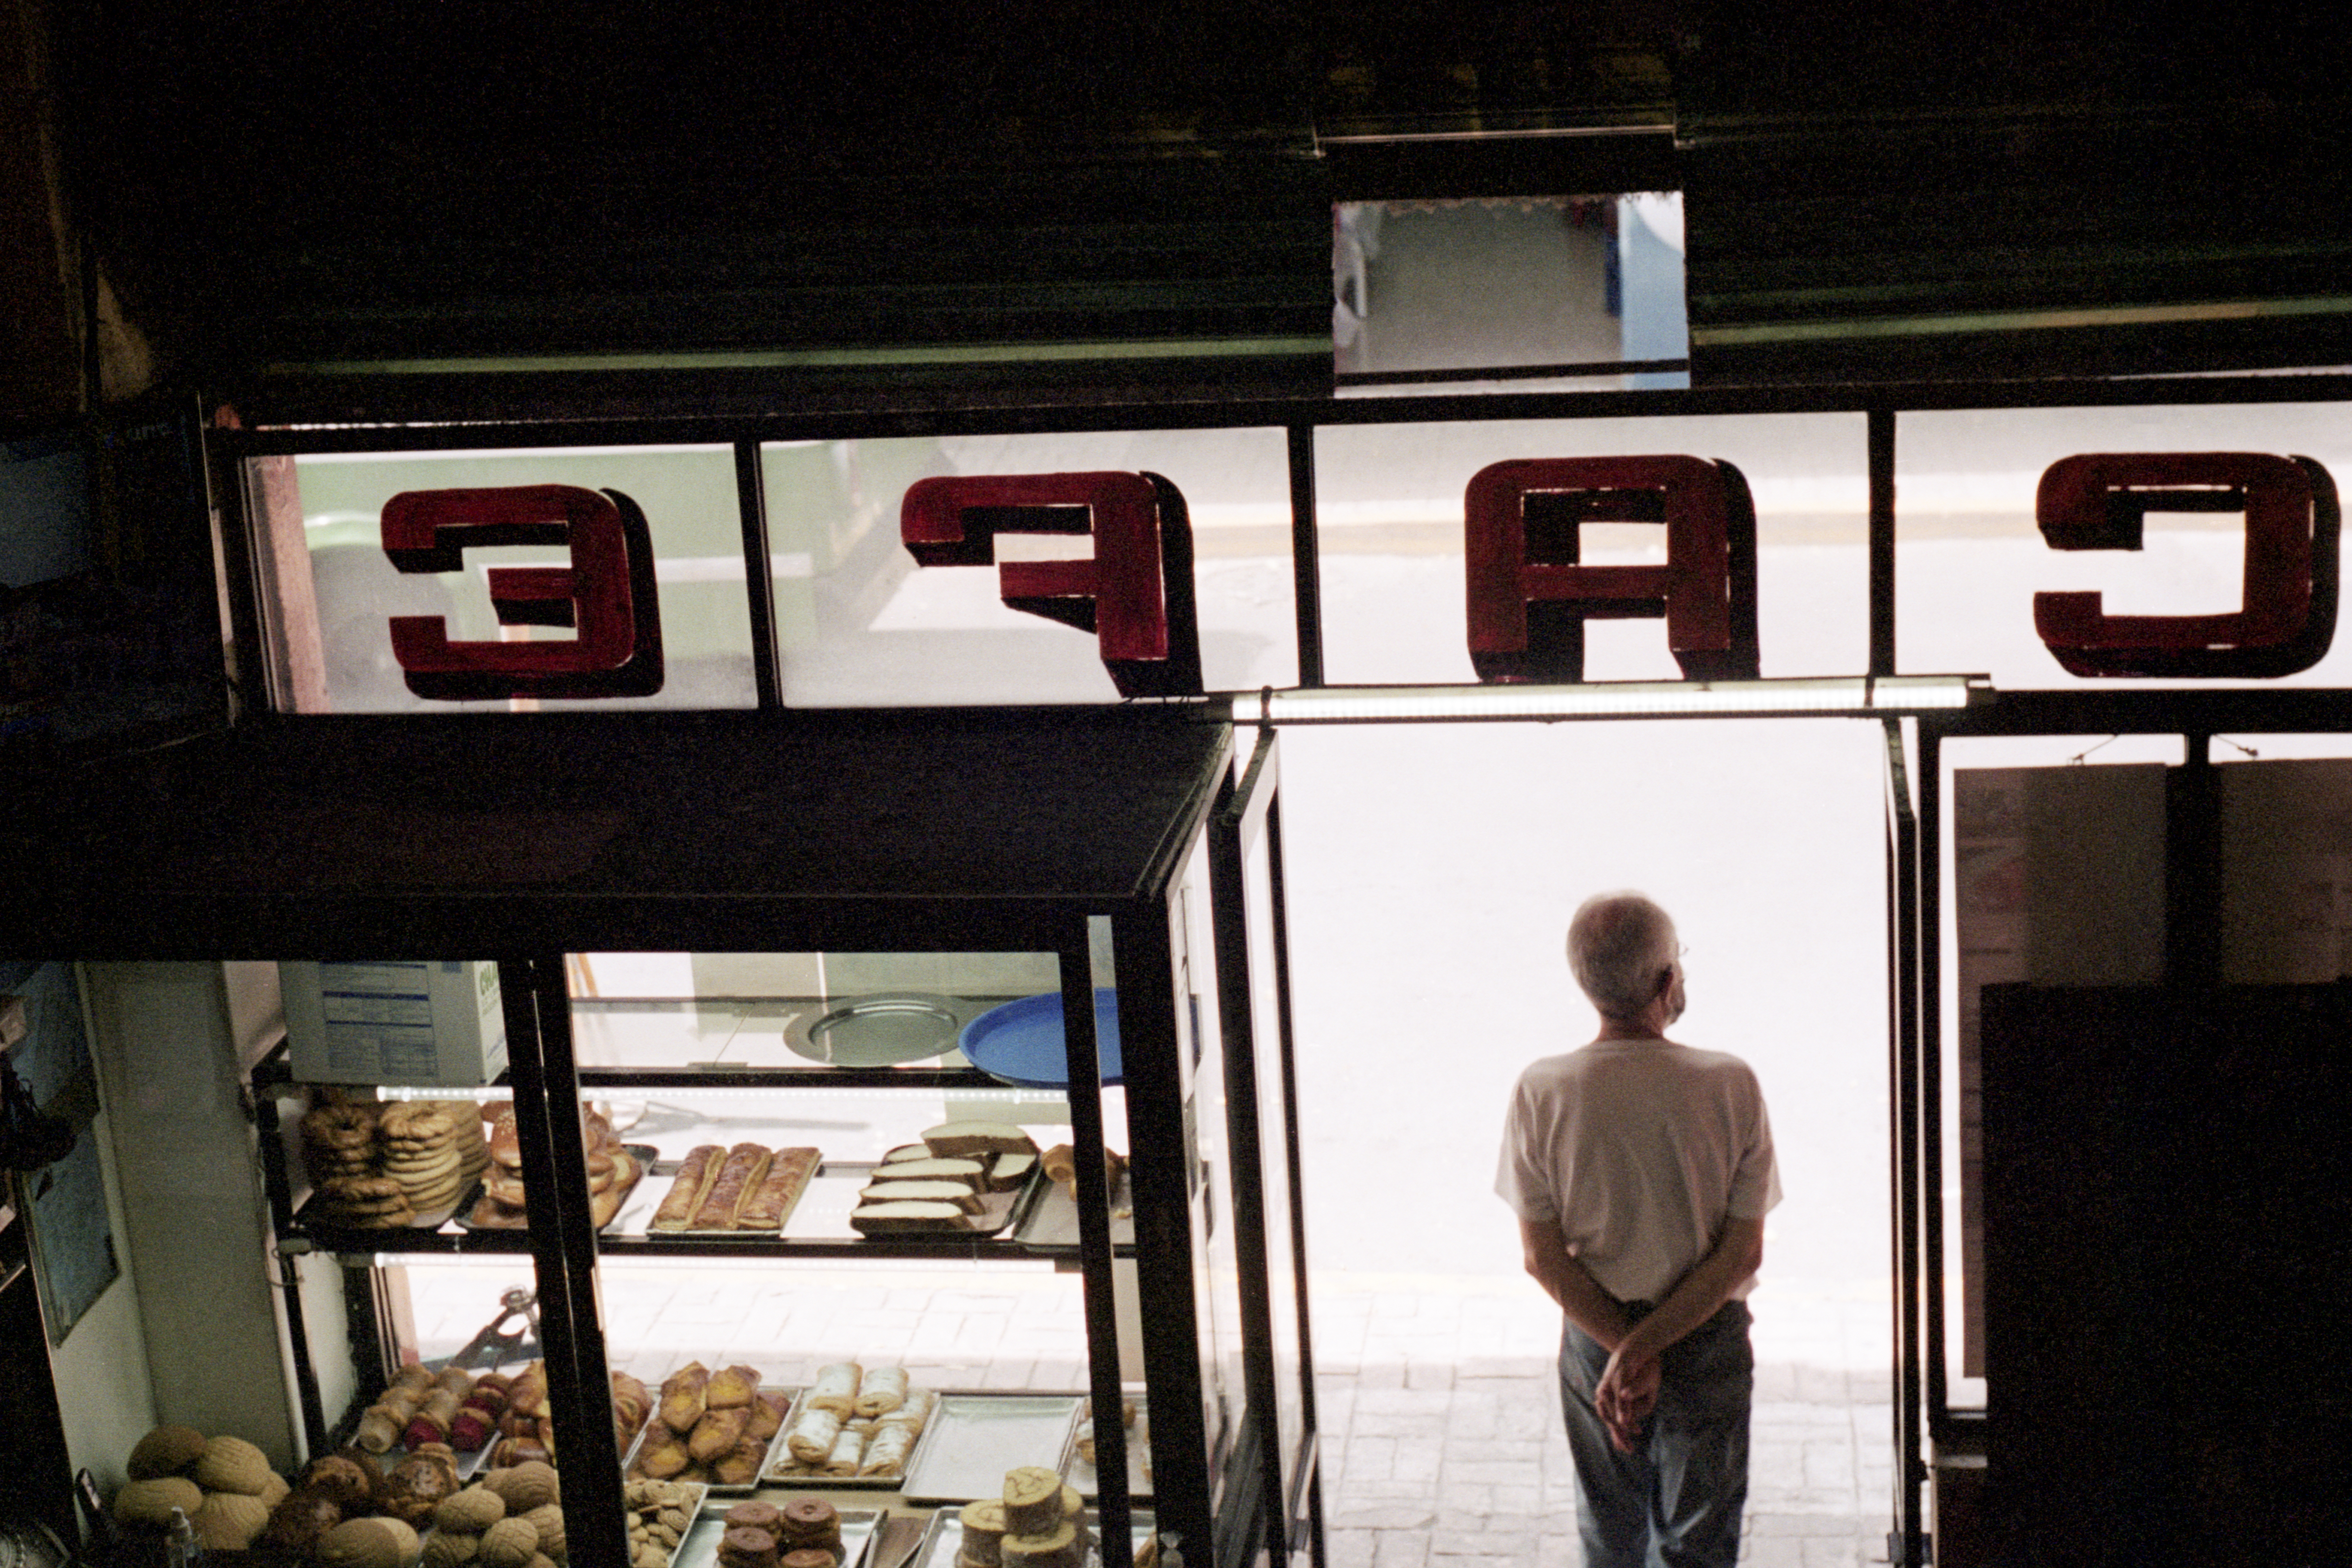 A man looks out the doorway longingly with a display of pastries in the shop window next to him. 